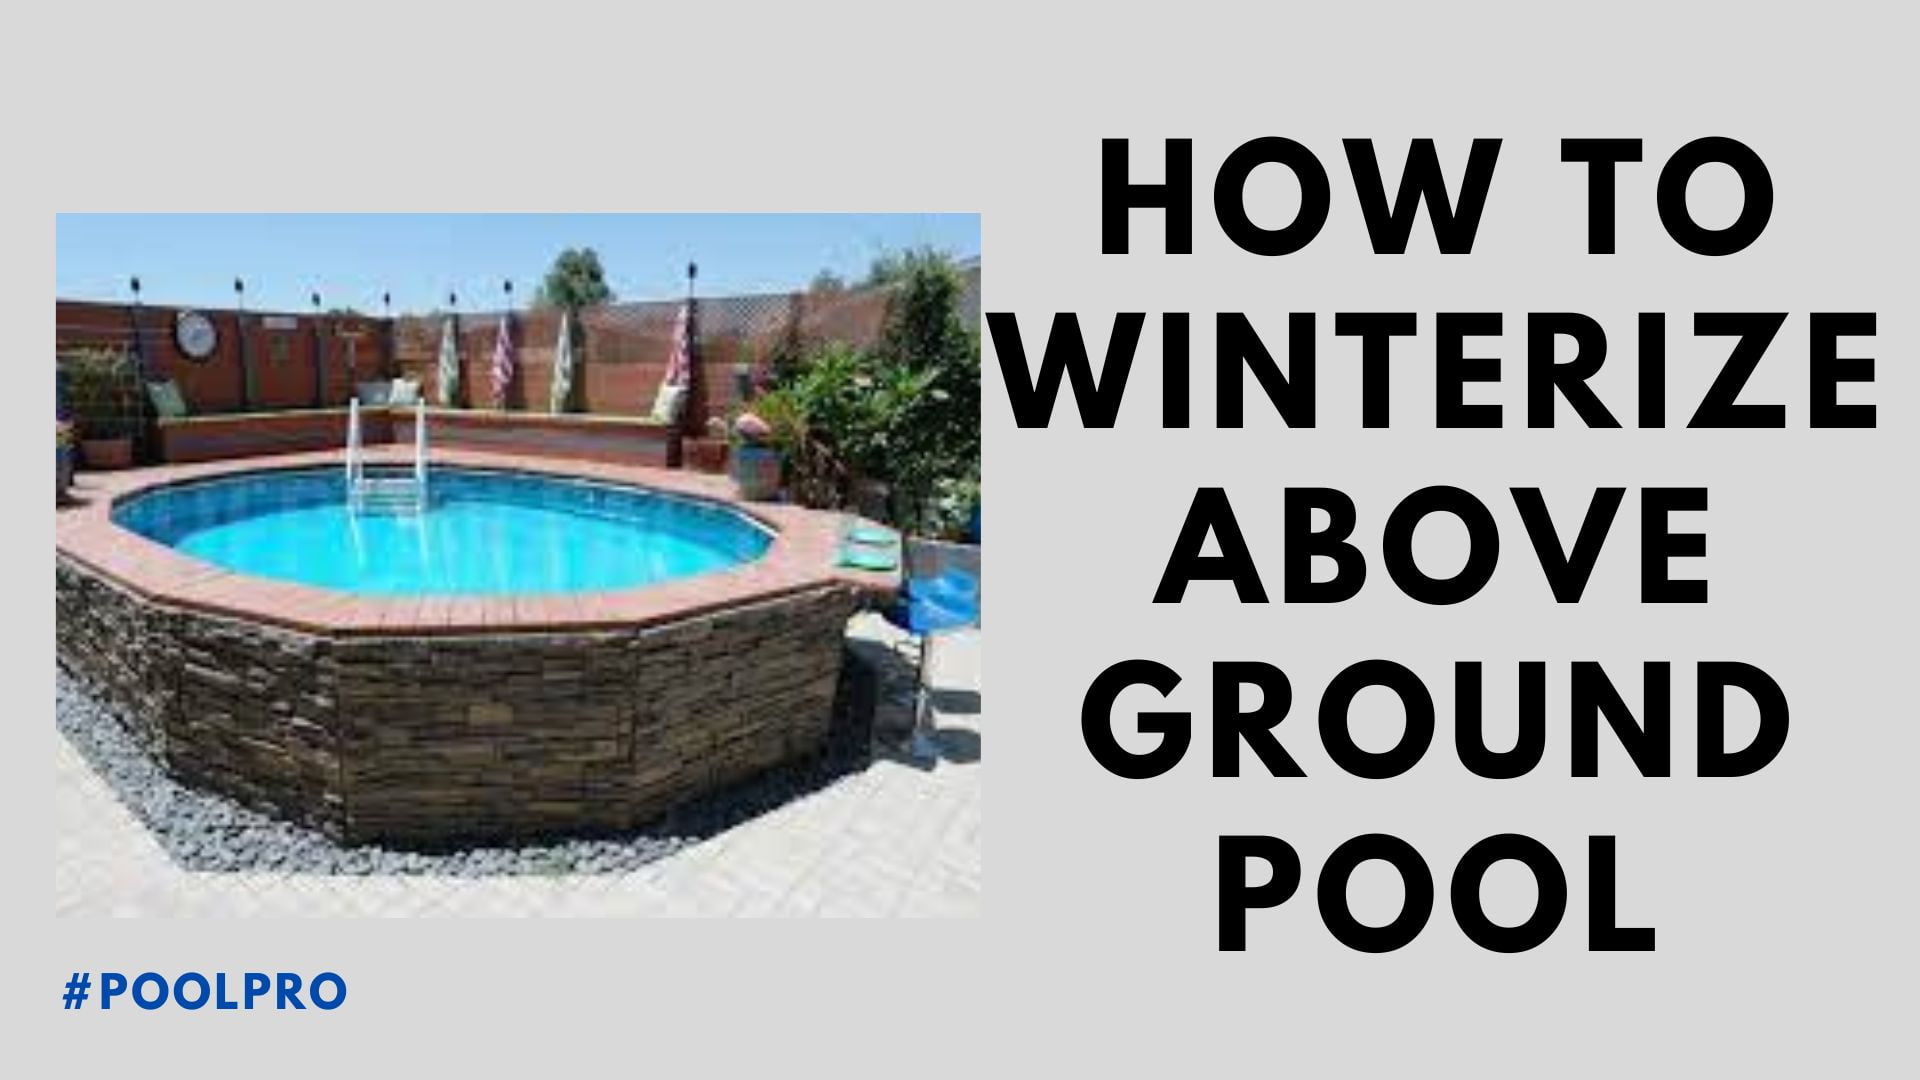 How to Winterize Above Ground Pool